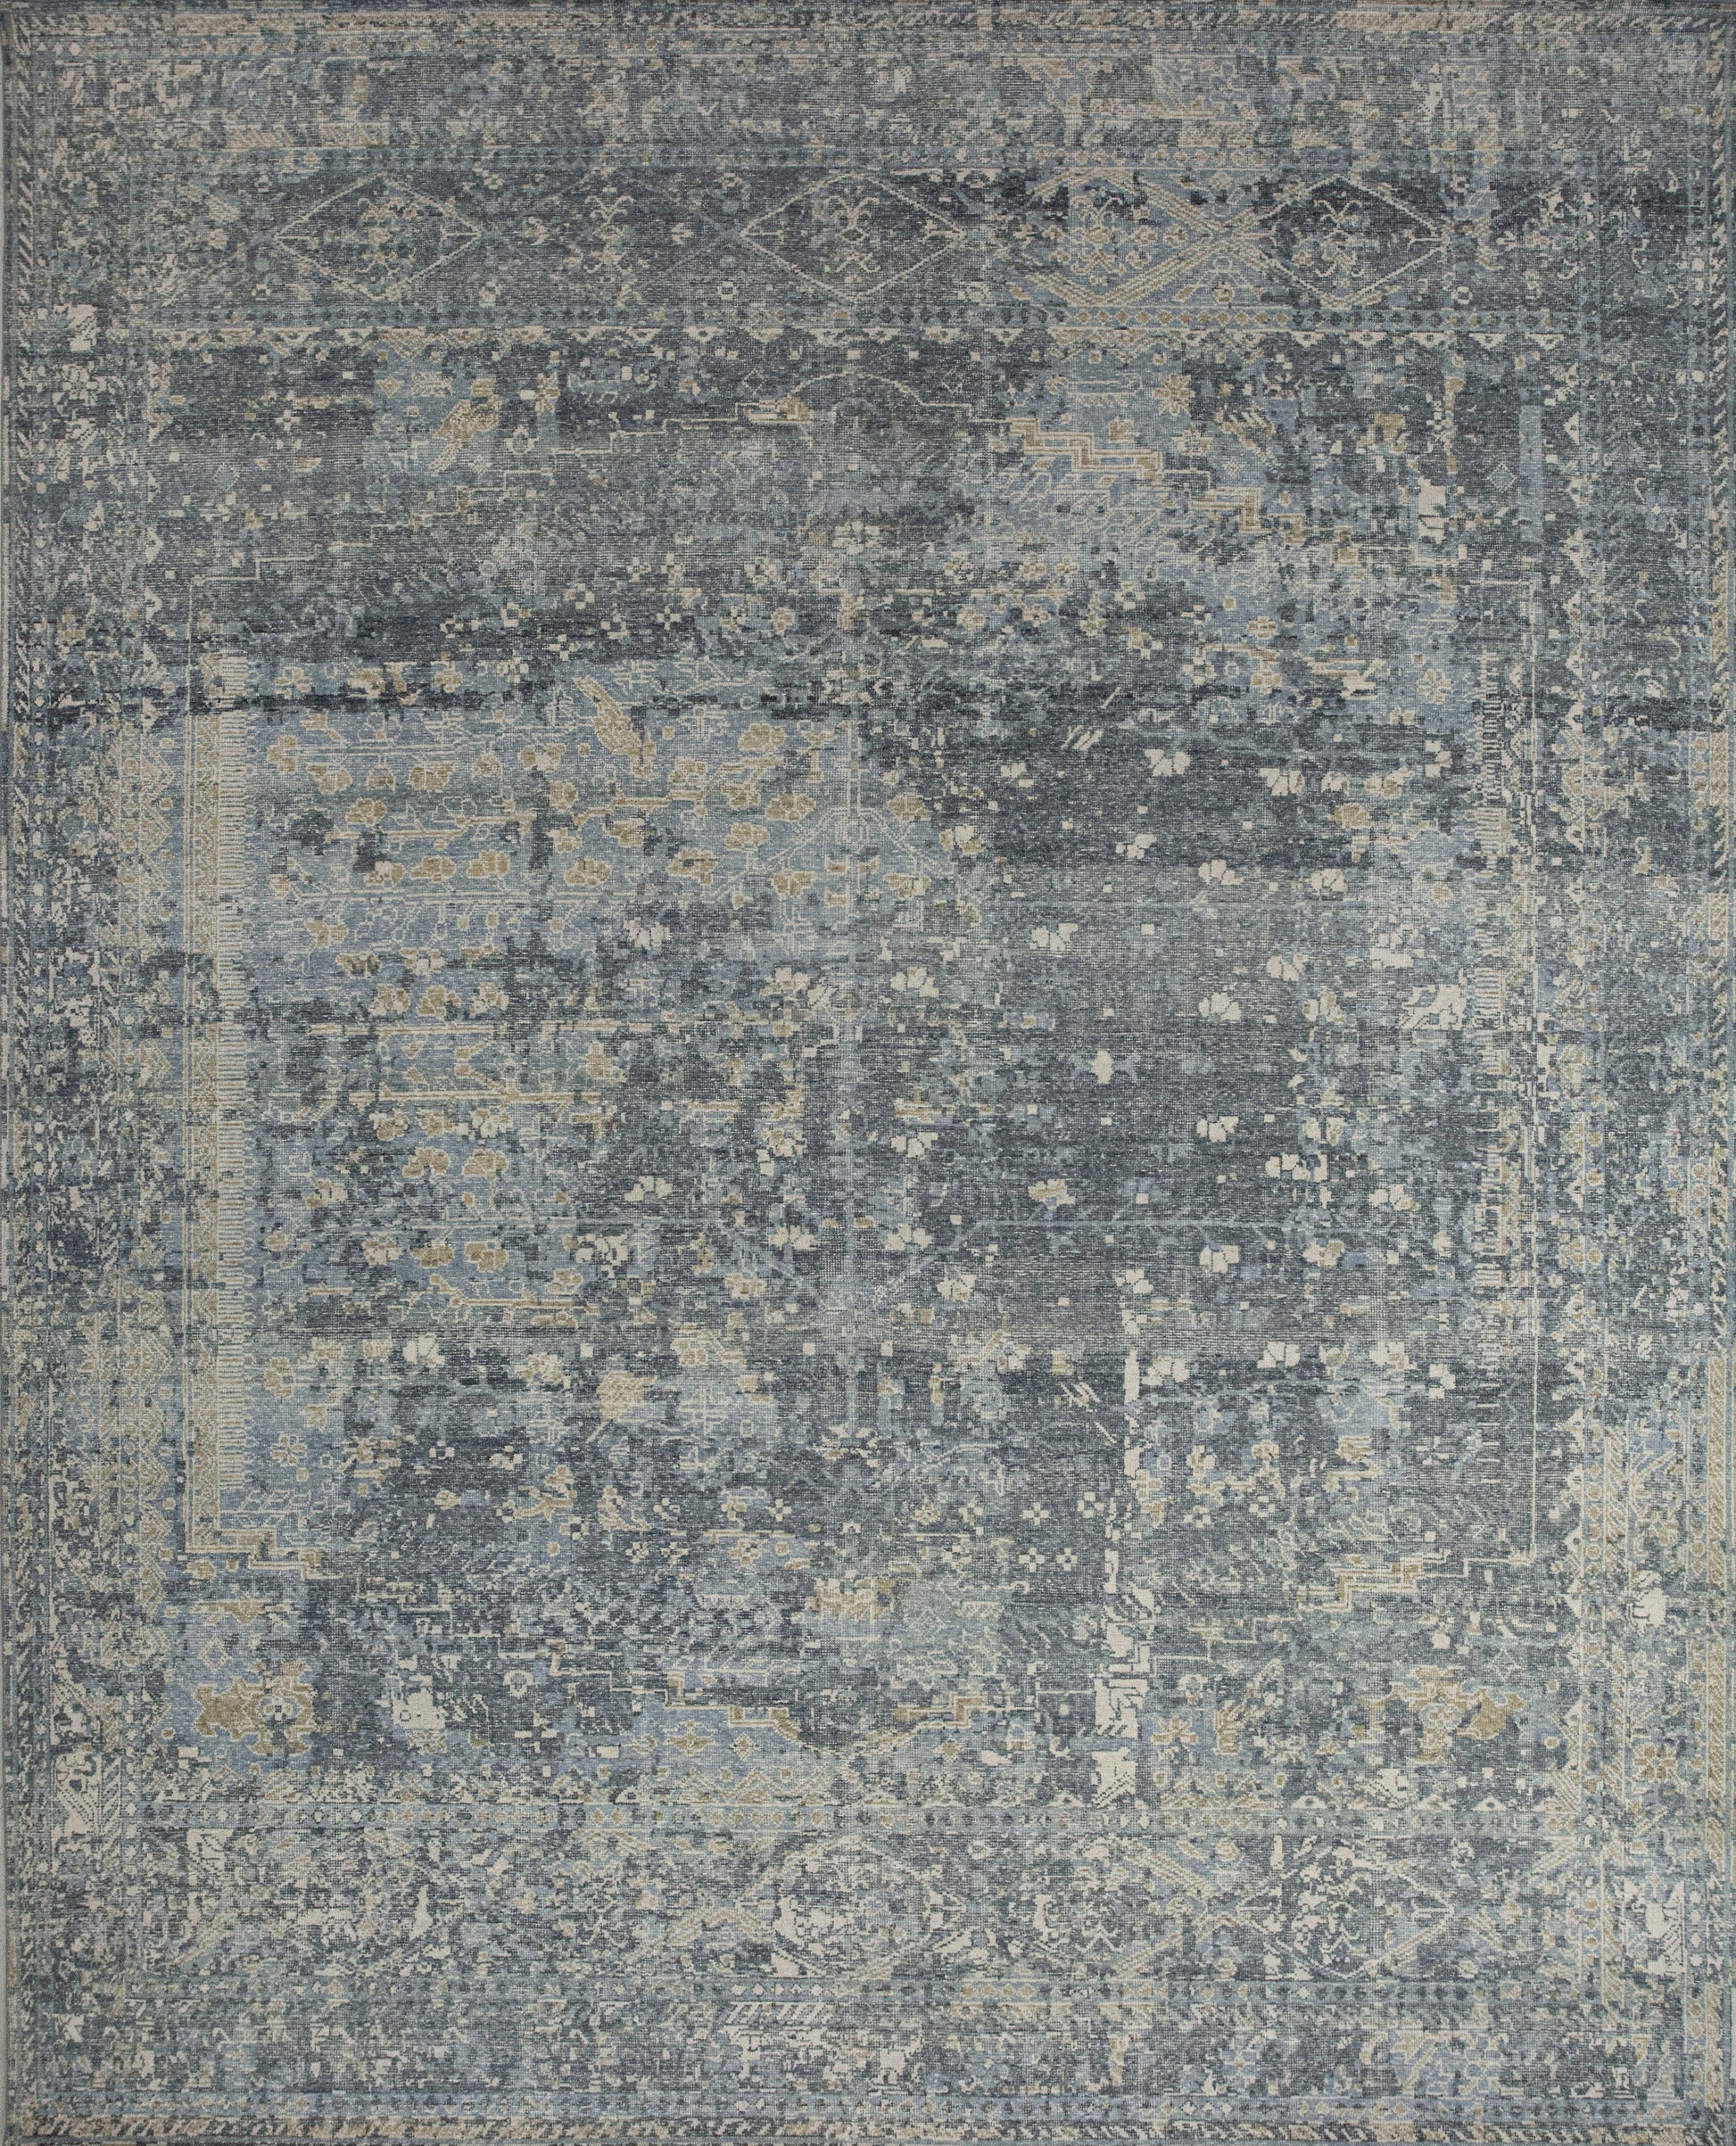 This breathtaking rug was woven with the high-quality vintage style. The design features cotton plants covered with an aged appearance. Furthermore, the duo-color scheme have variations of gray and beige.